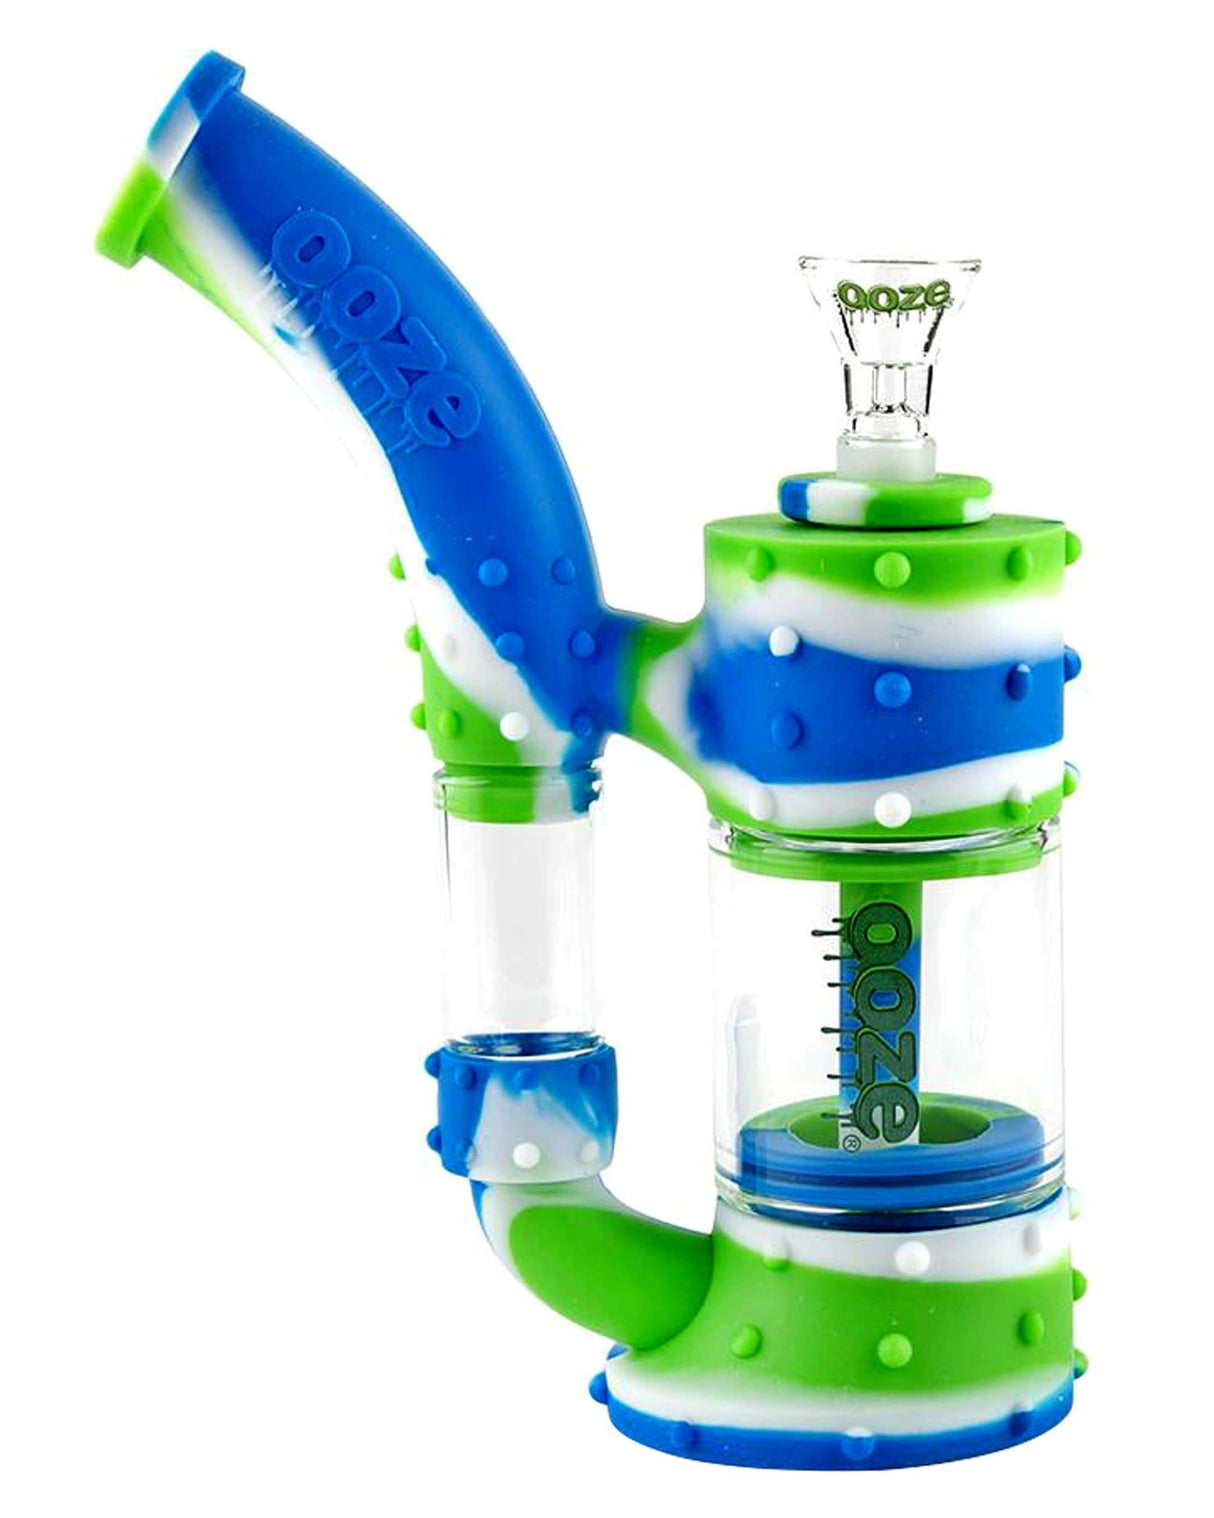 Ooze Stack Silicone Bubbler in Green & Blue with Quartz Banger - Front View